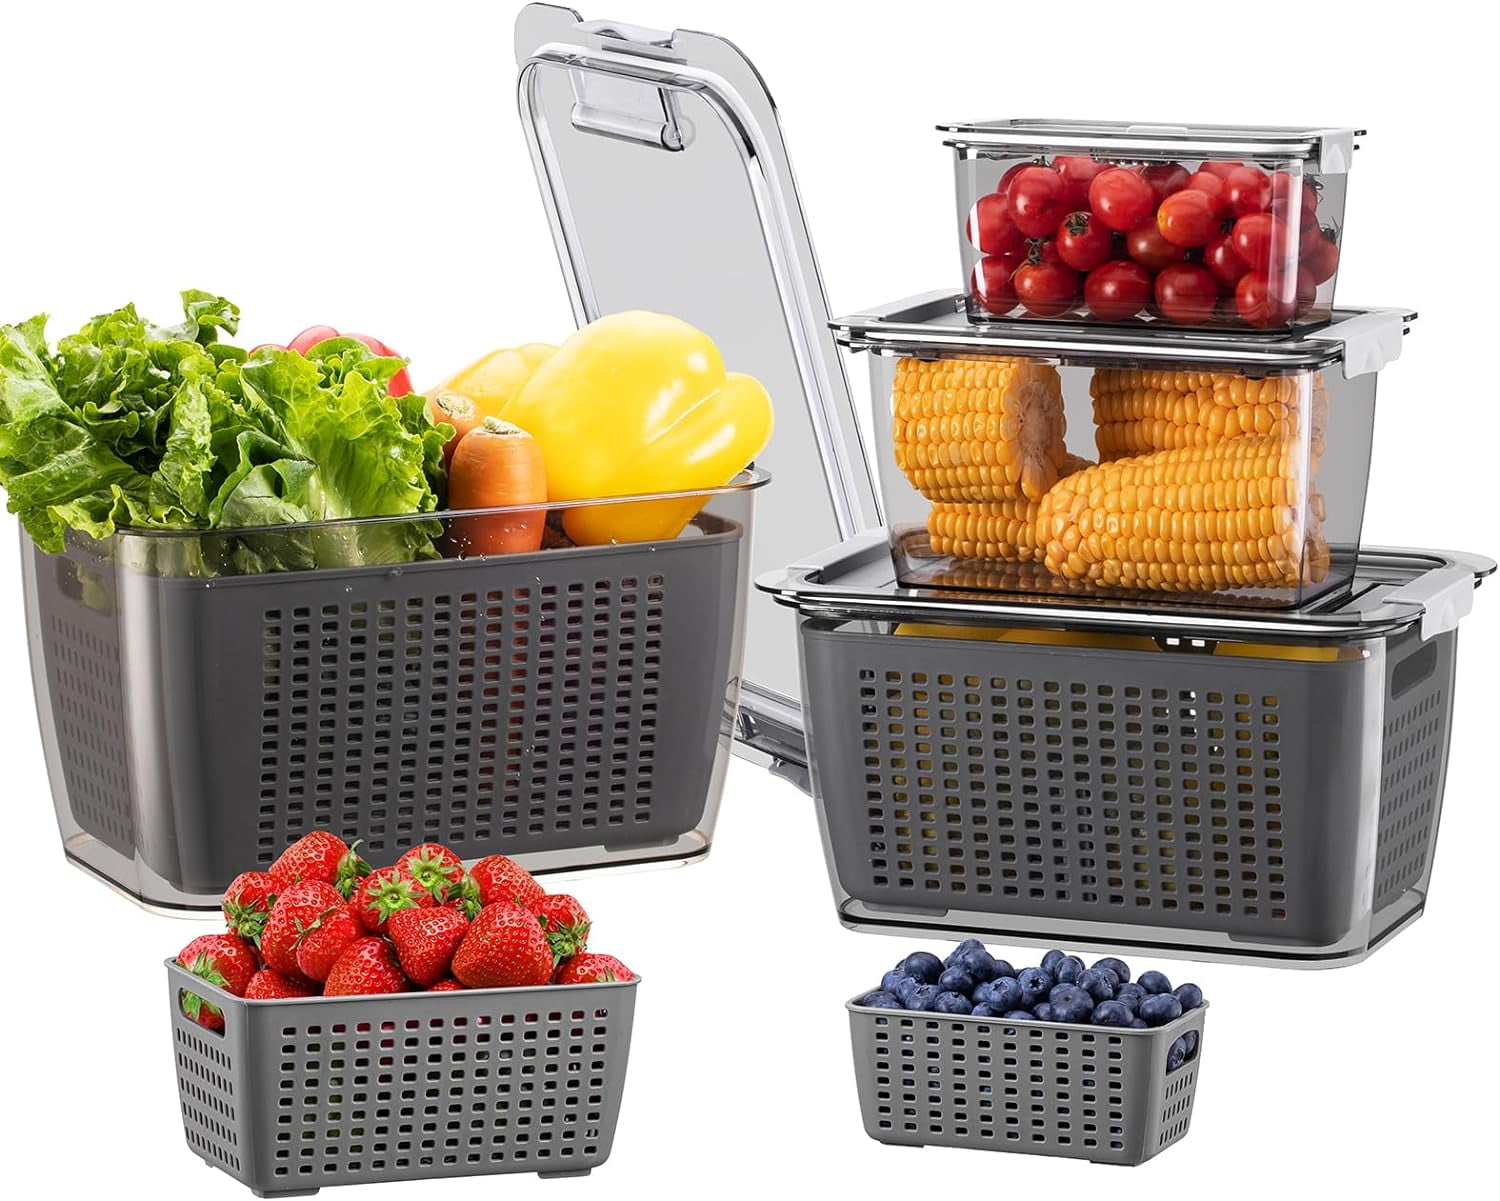 4 Pack Fruit Storage Containers for Fridge - Large Produce Saver